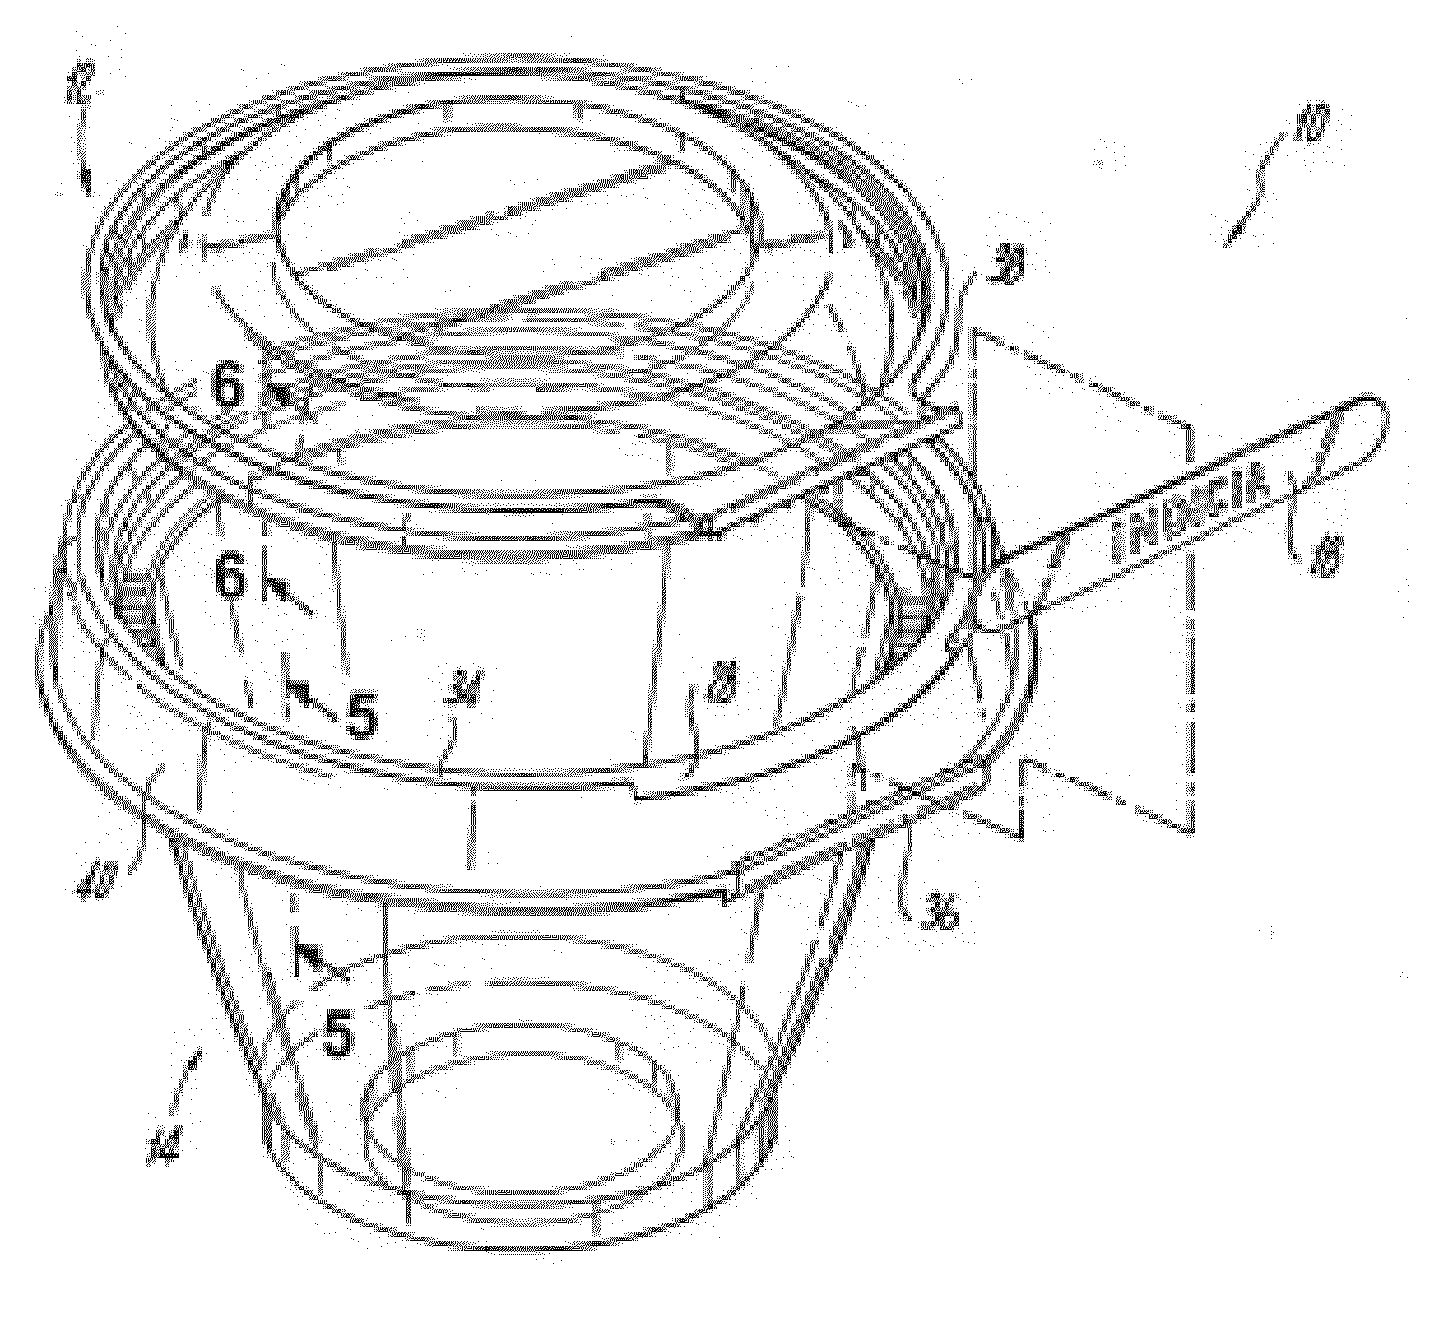 Tamper-resistant container with tamper-evident feature and method of forming same